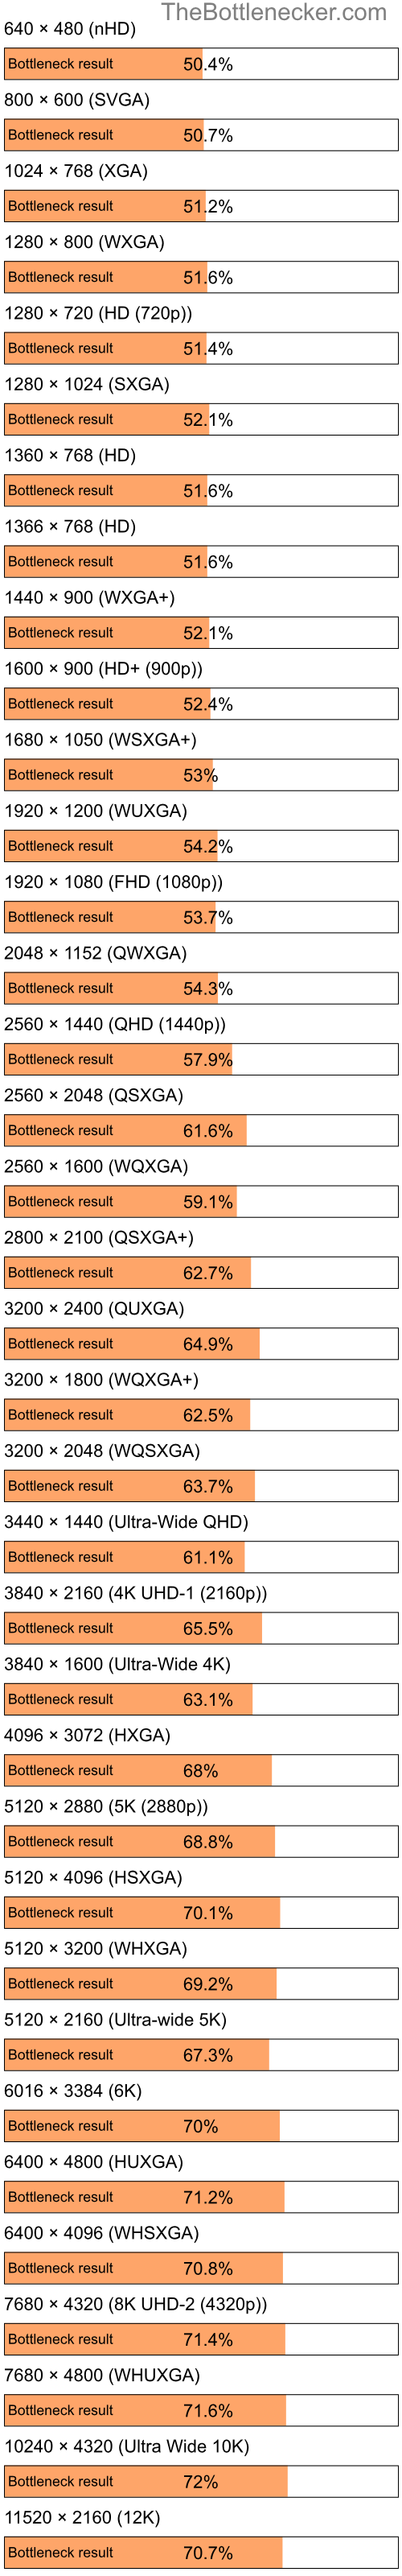 Bottleneck results by resolution for Intel Pentium 4 and NVIDIA Quadro FX 4400 in Processor Intense Tasks